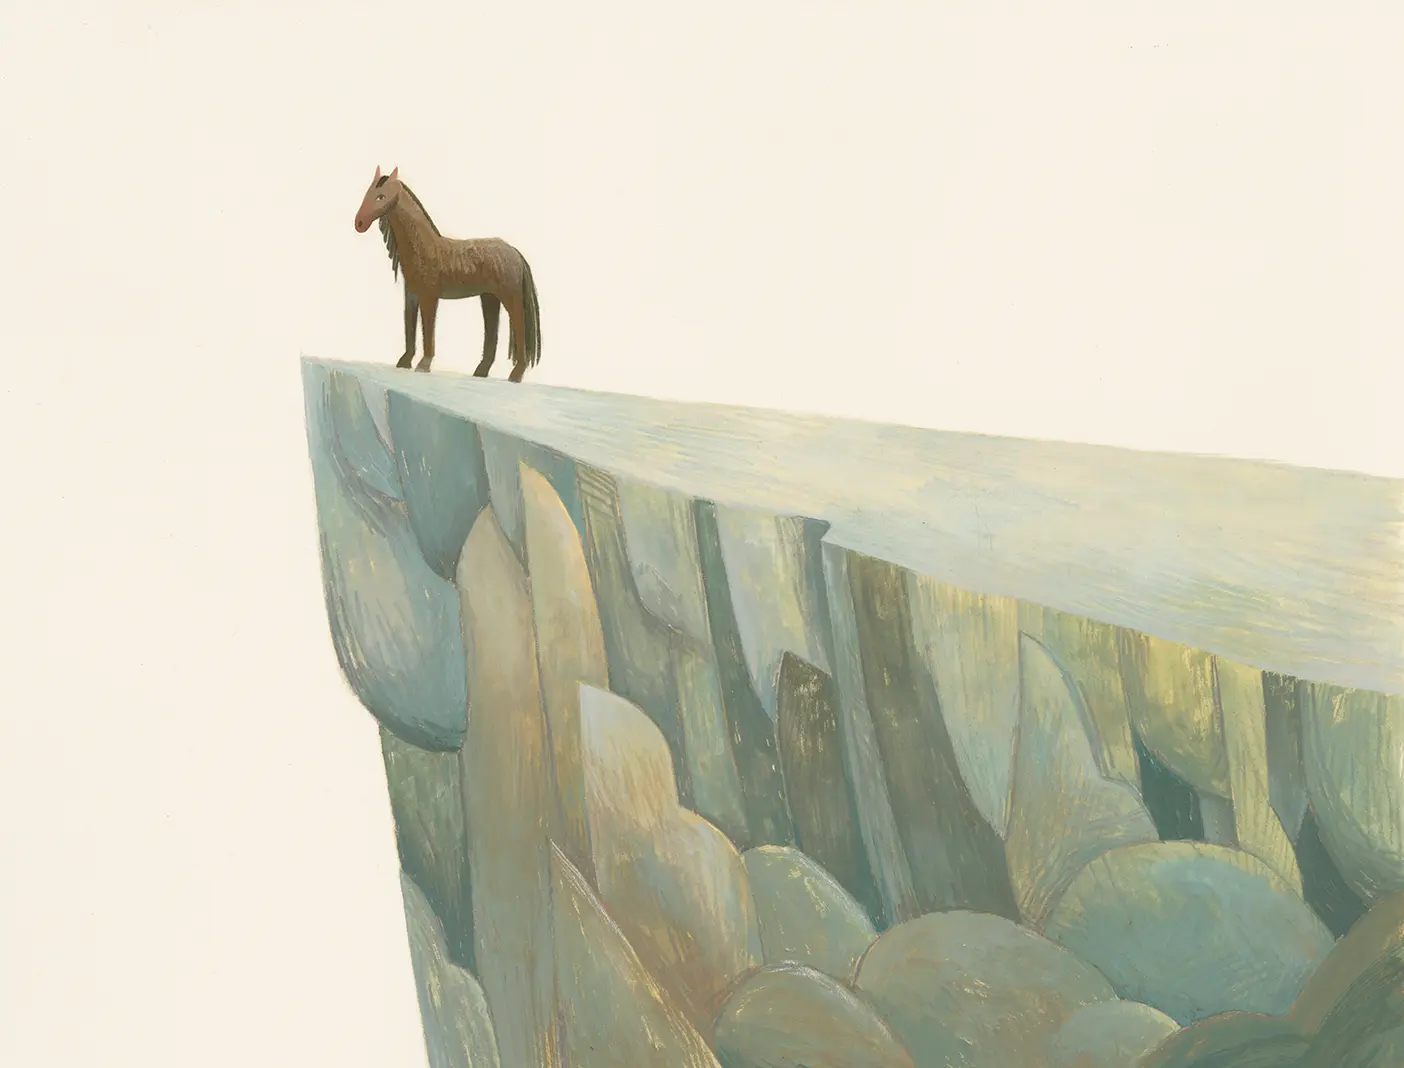 A brown horse stands at the edge of a cliff.